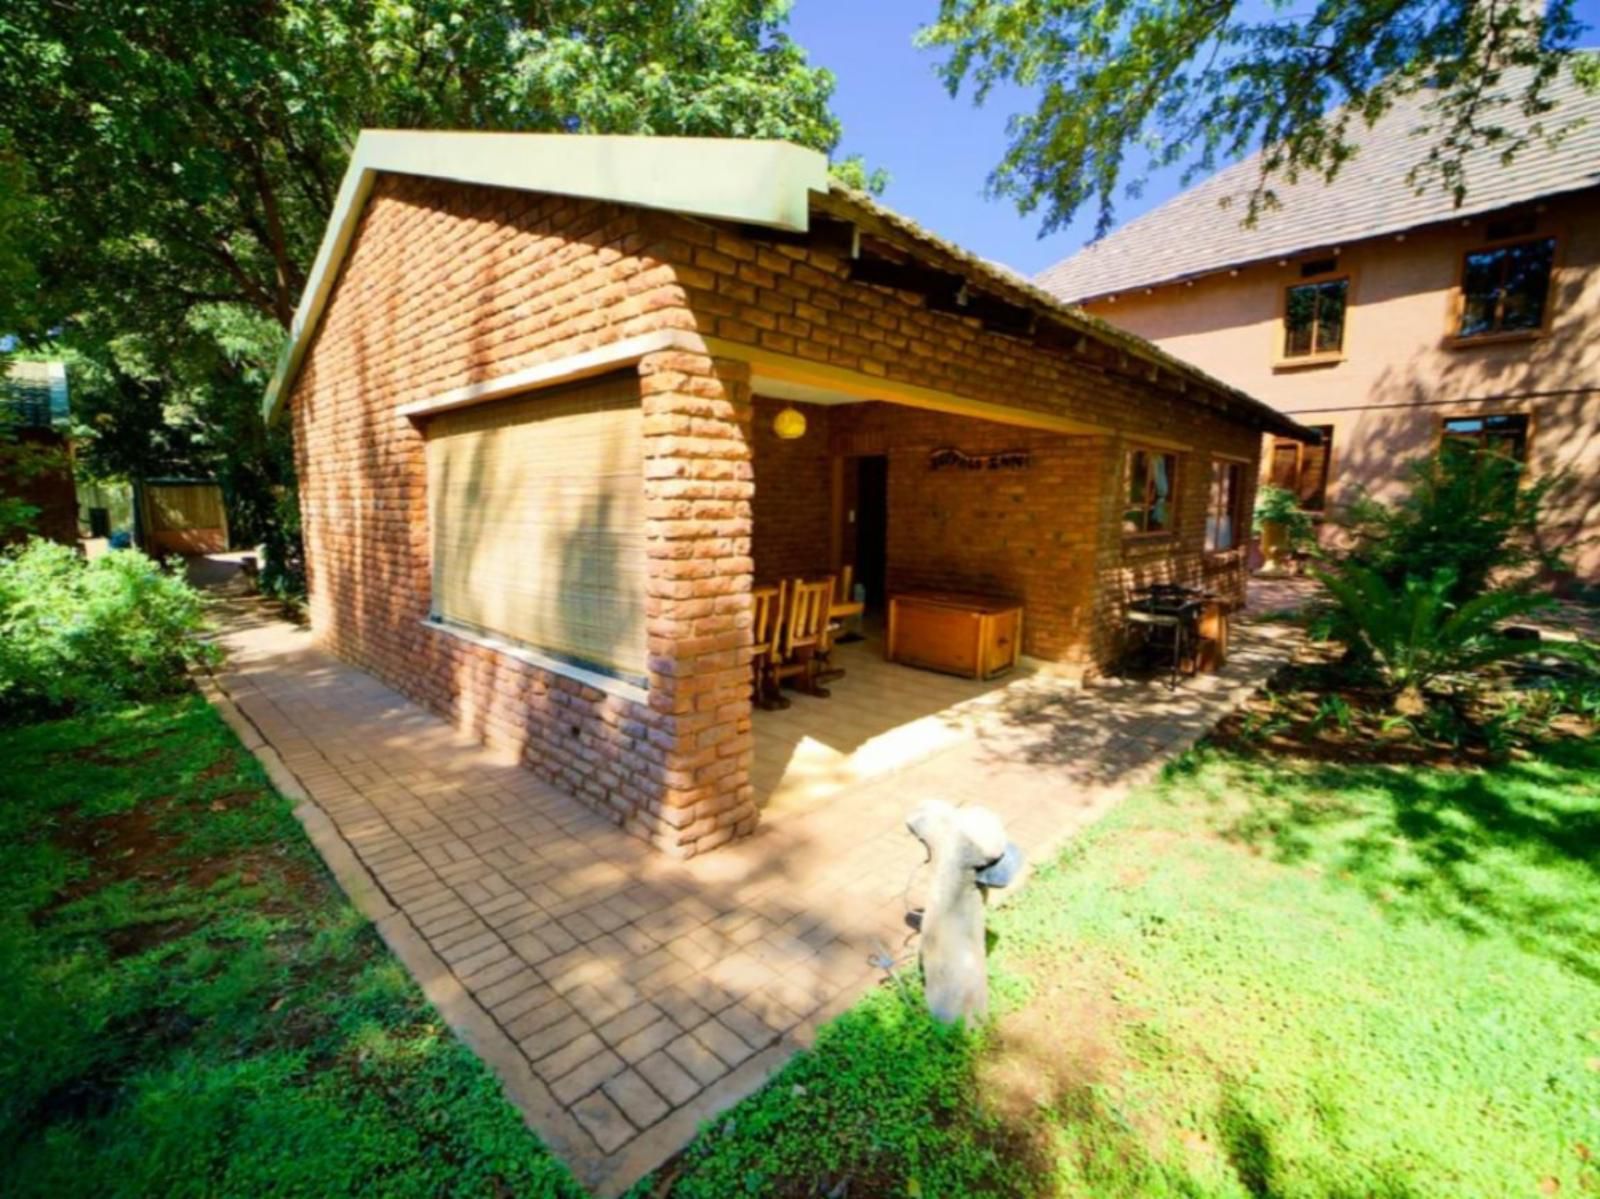 Shelanti Game Reserve Marken Limpopo Province South Africa Cabin, Building, Architecture, House